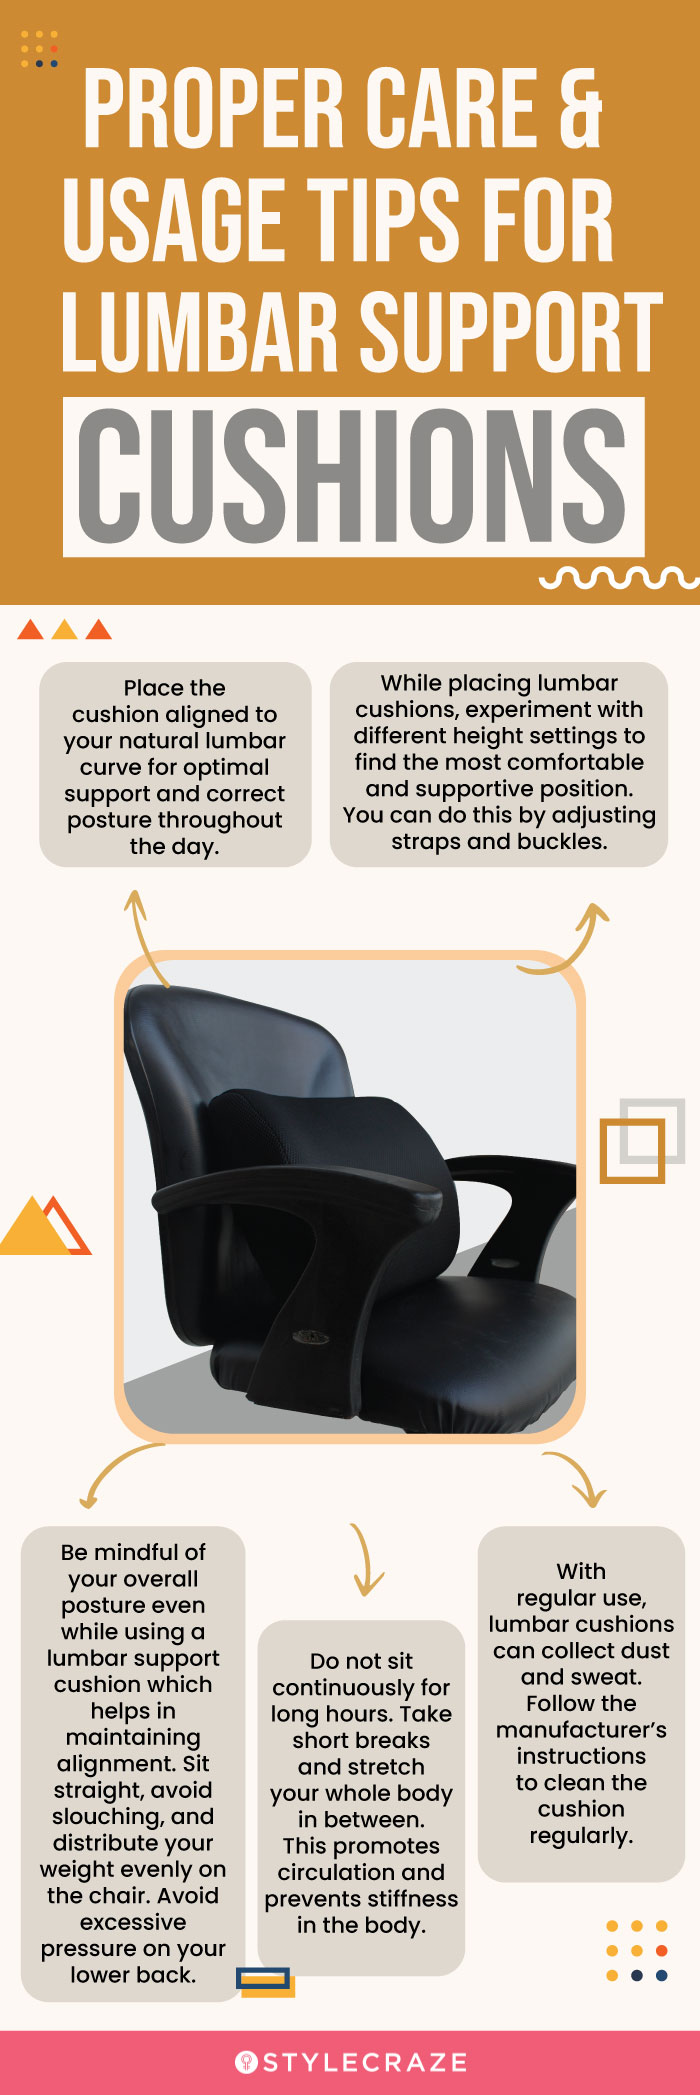 Proper Care & Usage Tips For Lumbar Support Cushions (infographic)